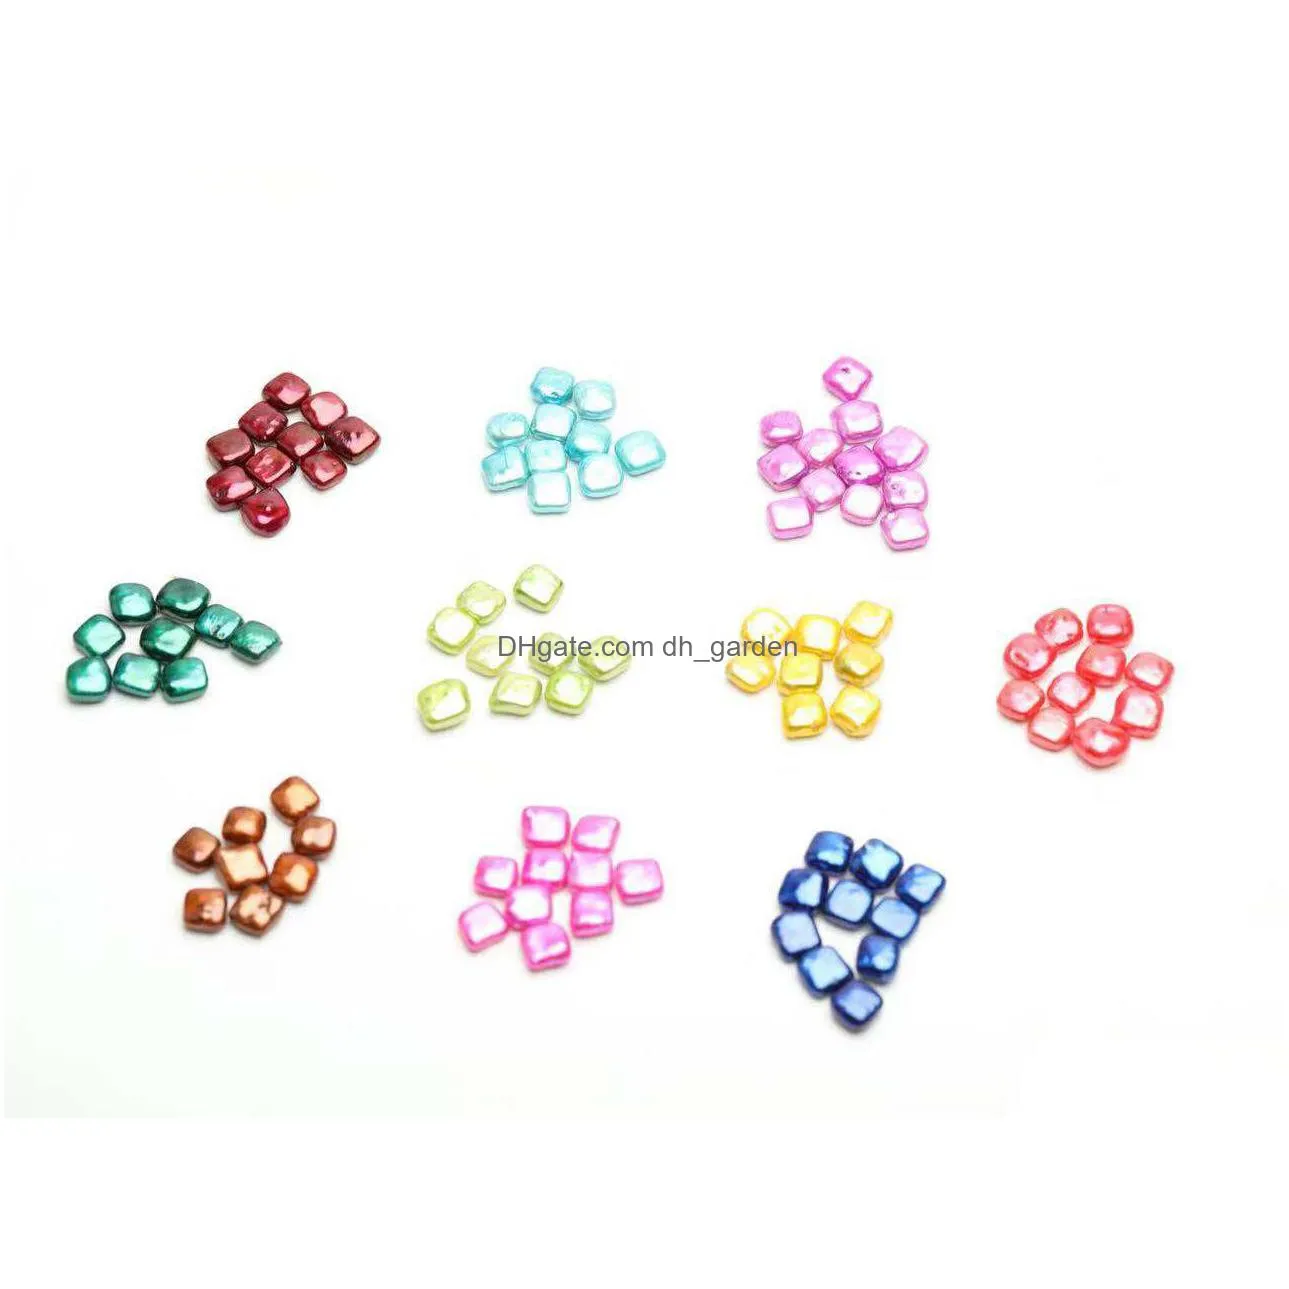 wholesale fashion unique loose heart shape freshwater pearls dyed colorful mix undrilled loose pearls shipping